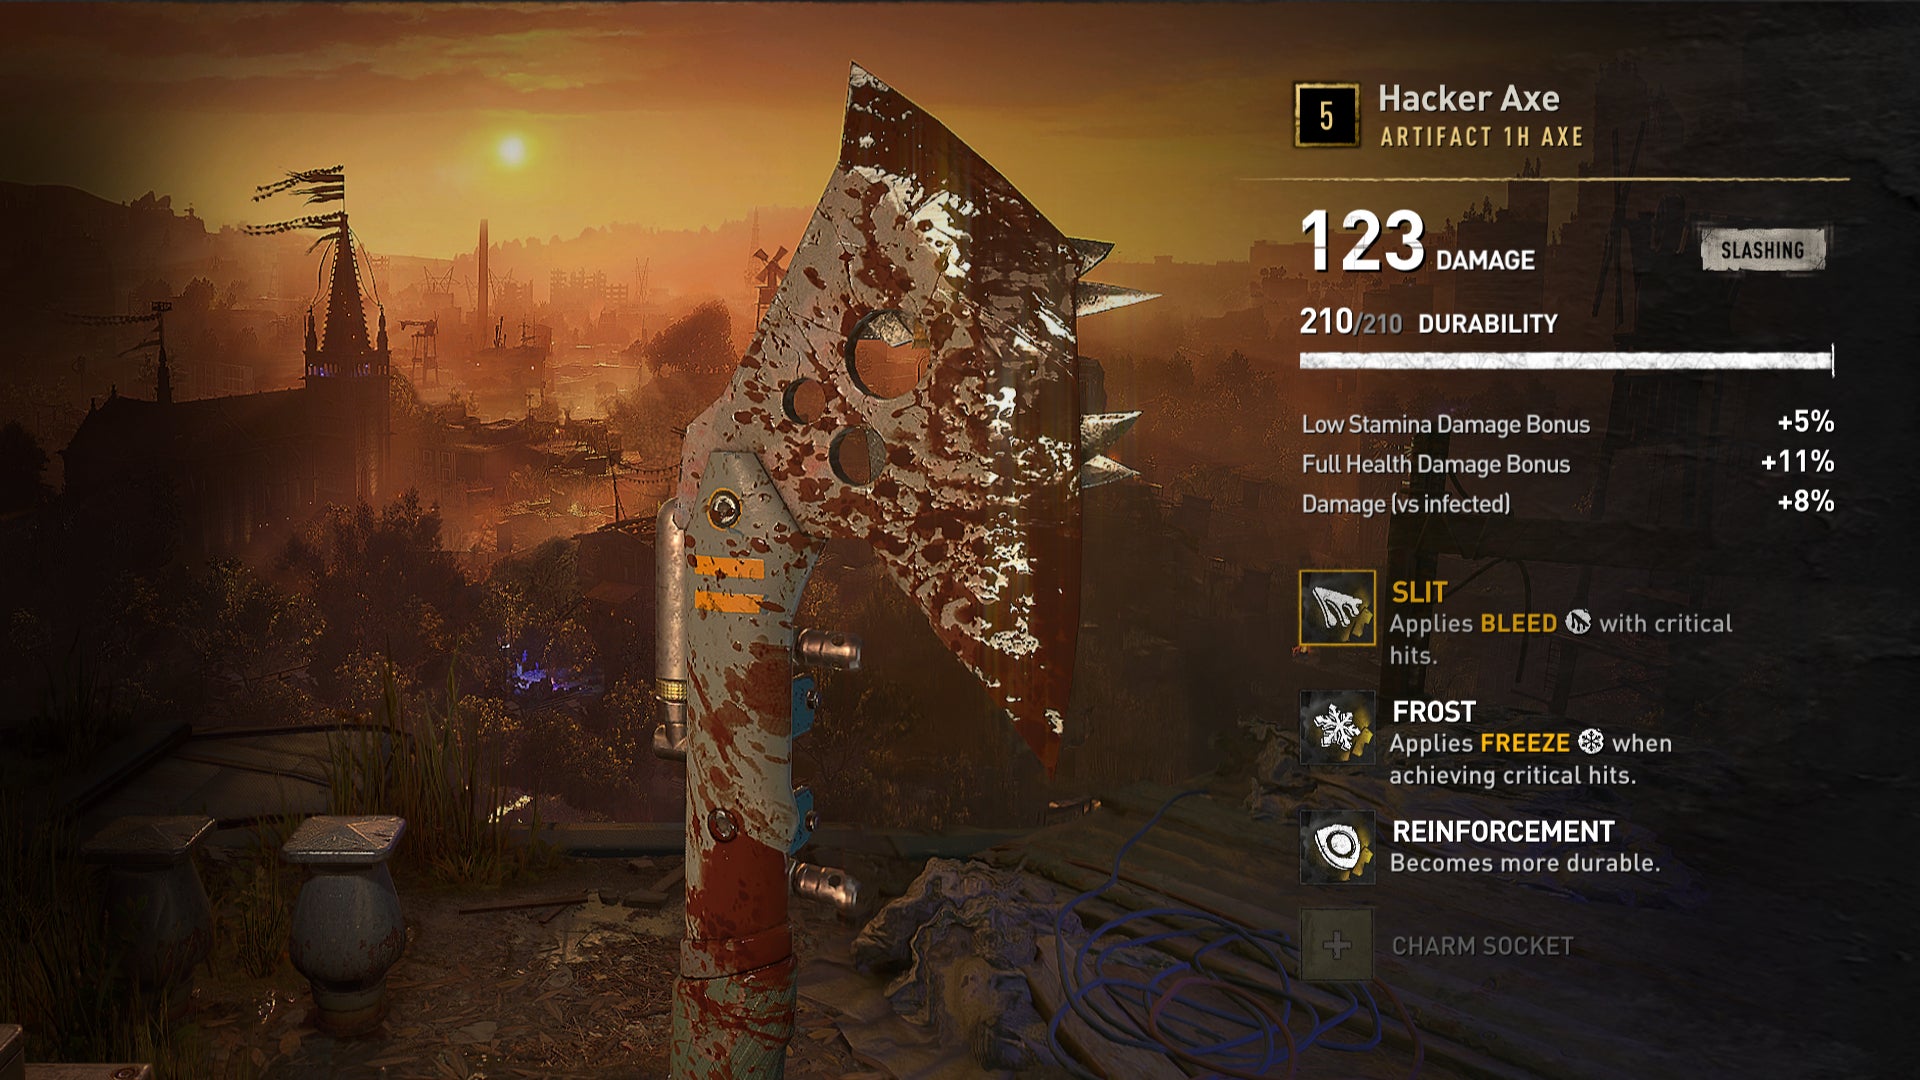 The weapon modification screen in Dying Light 2, featuring a Hacker Axe with three weapon mods attached.